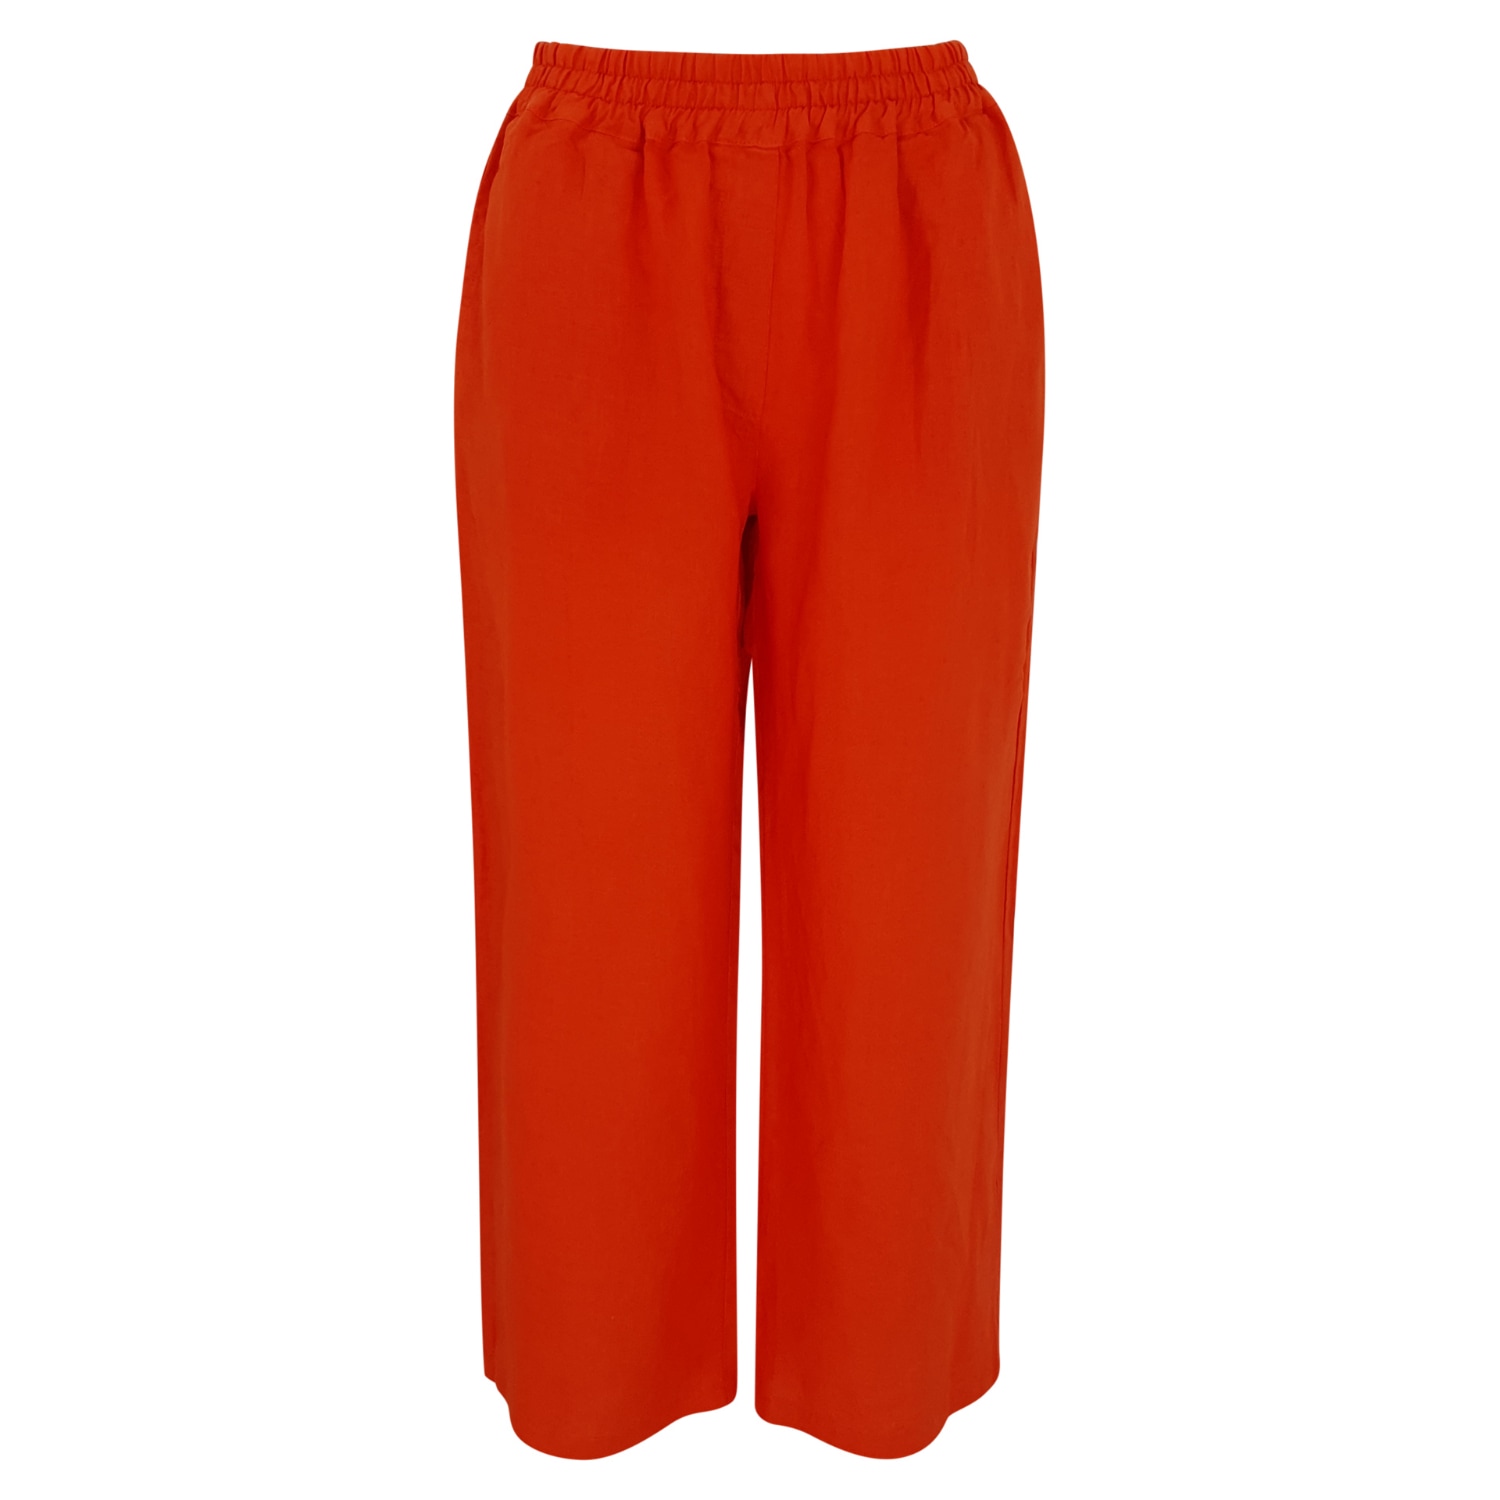 Haris Cotton Women's Red Solid Wide Leg Linen Pants With Slant Pocket - Coral Reef In Orange